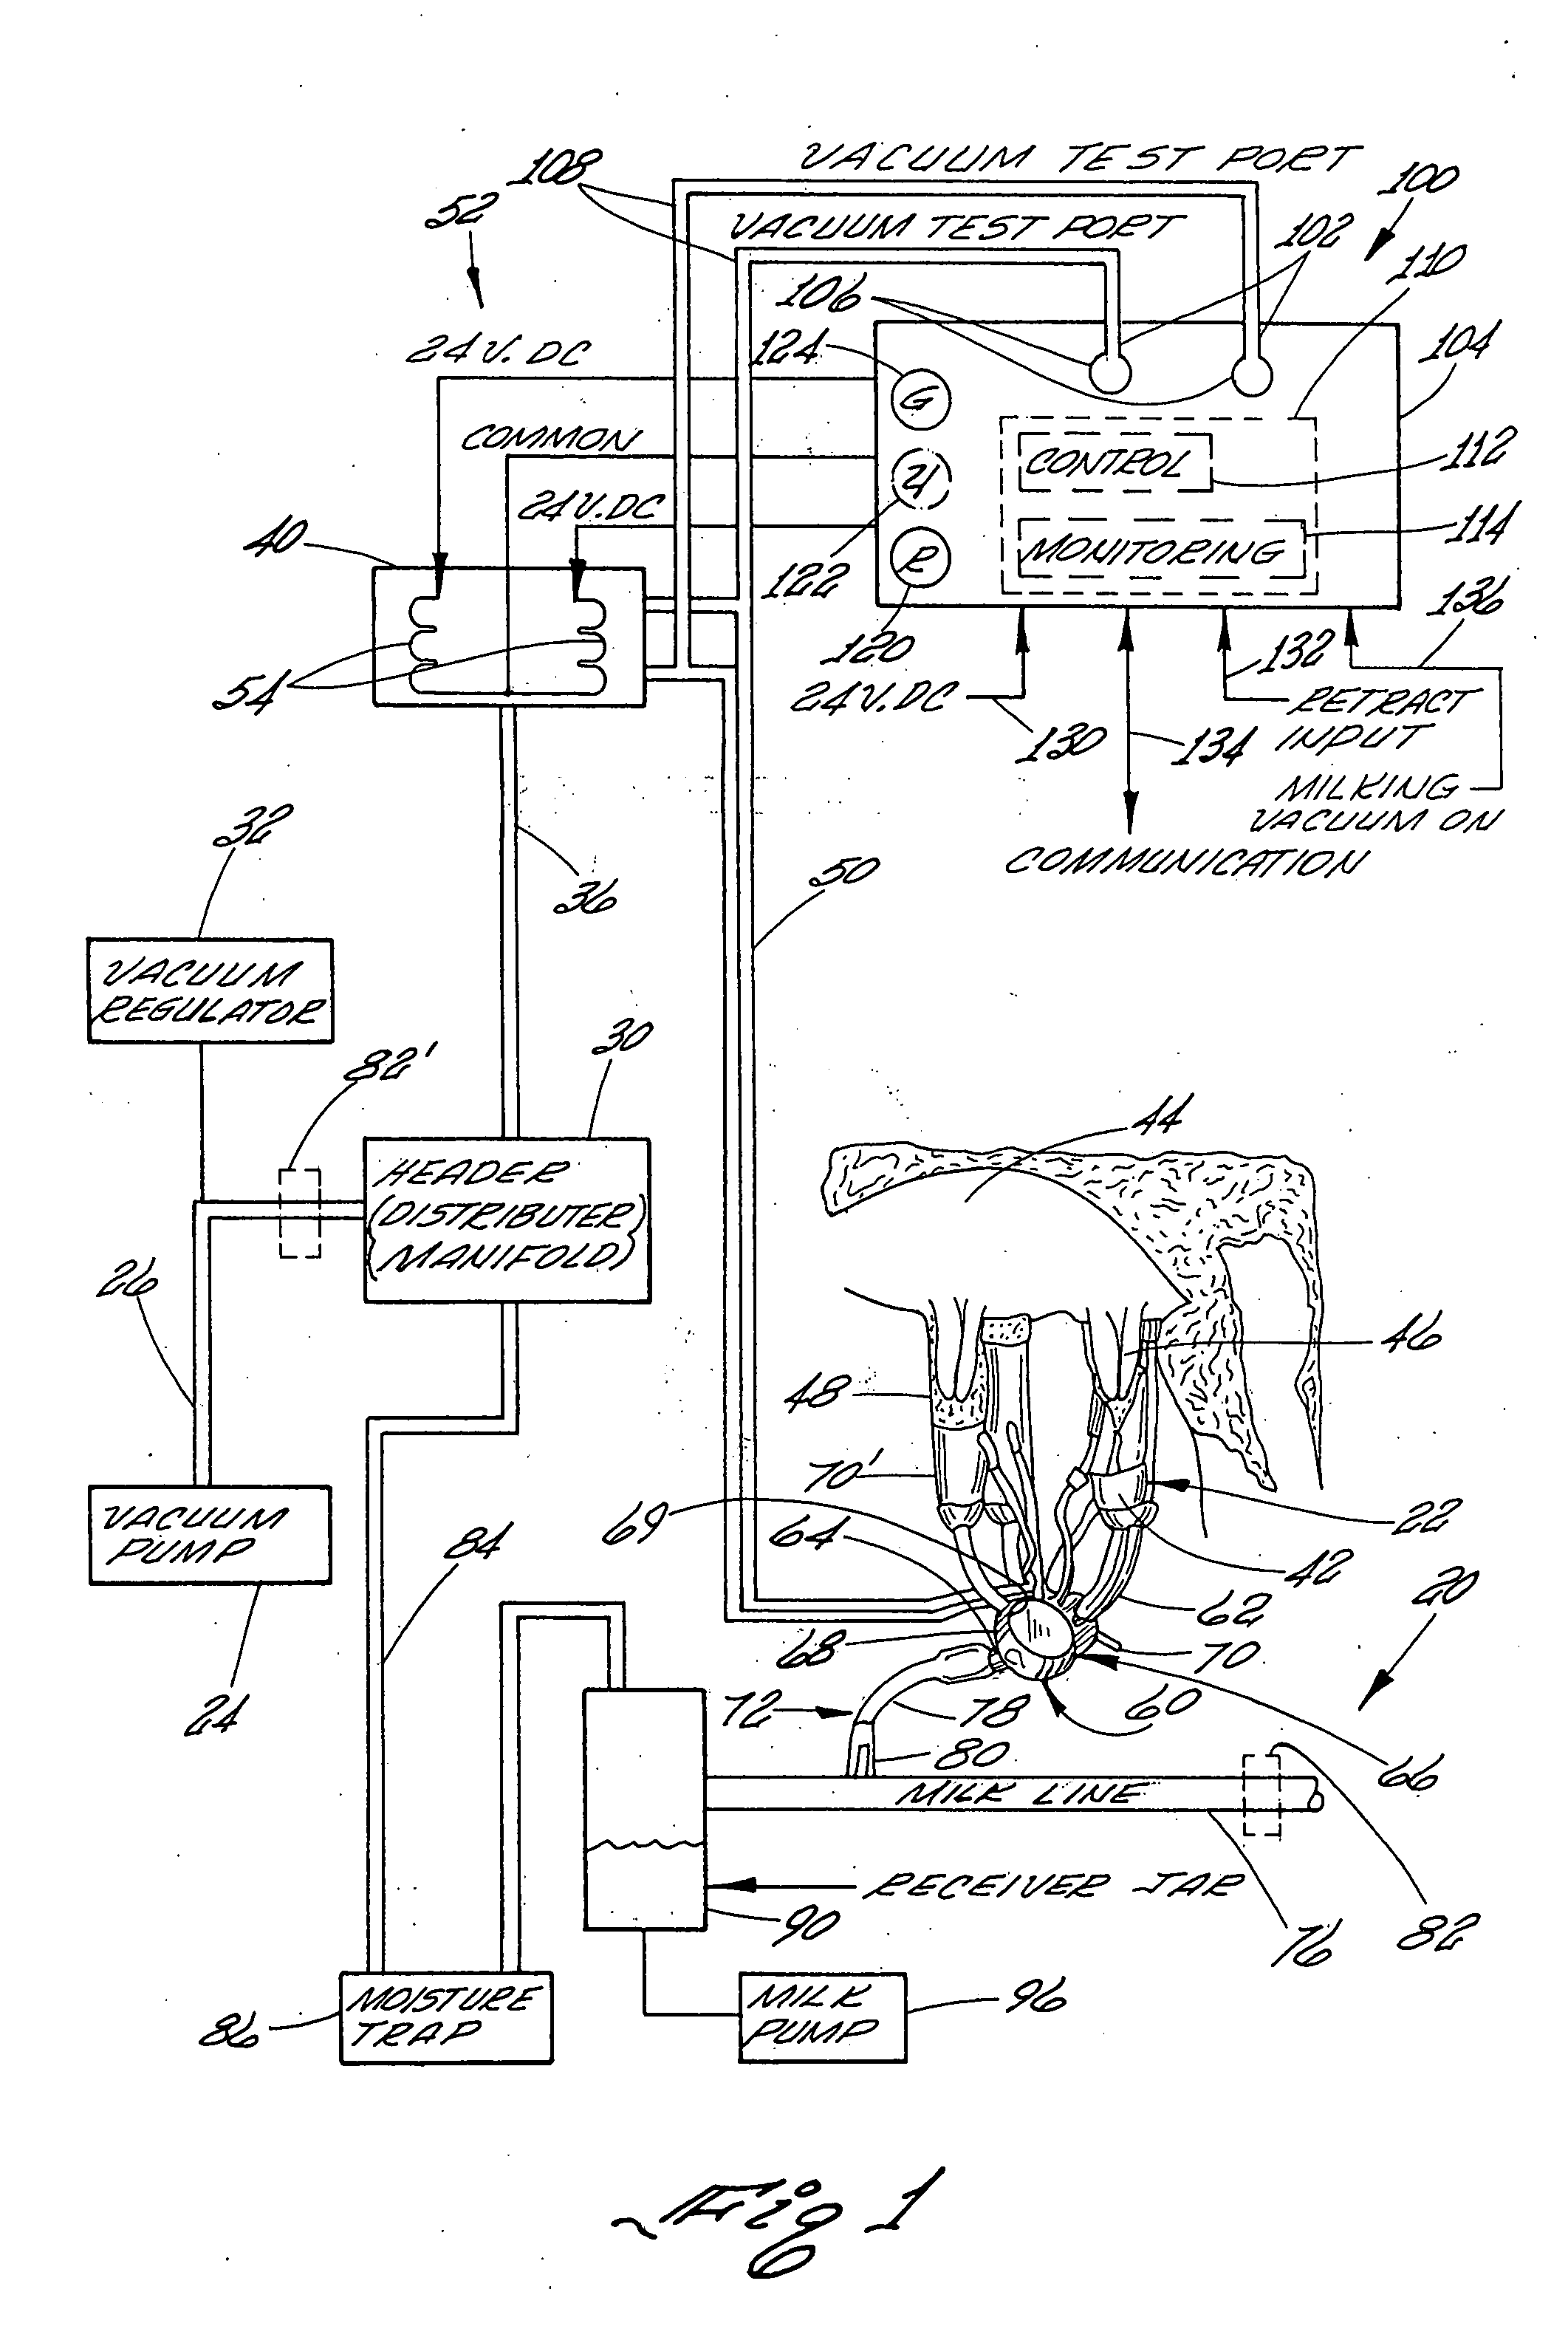 Controller for monitoring and controlling pulsators in a milking system